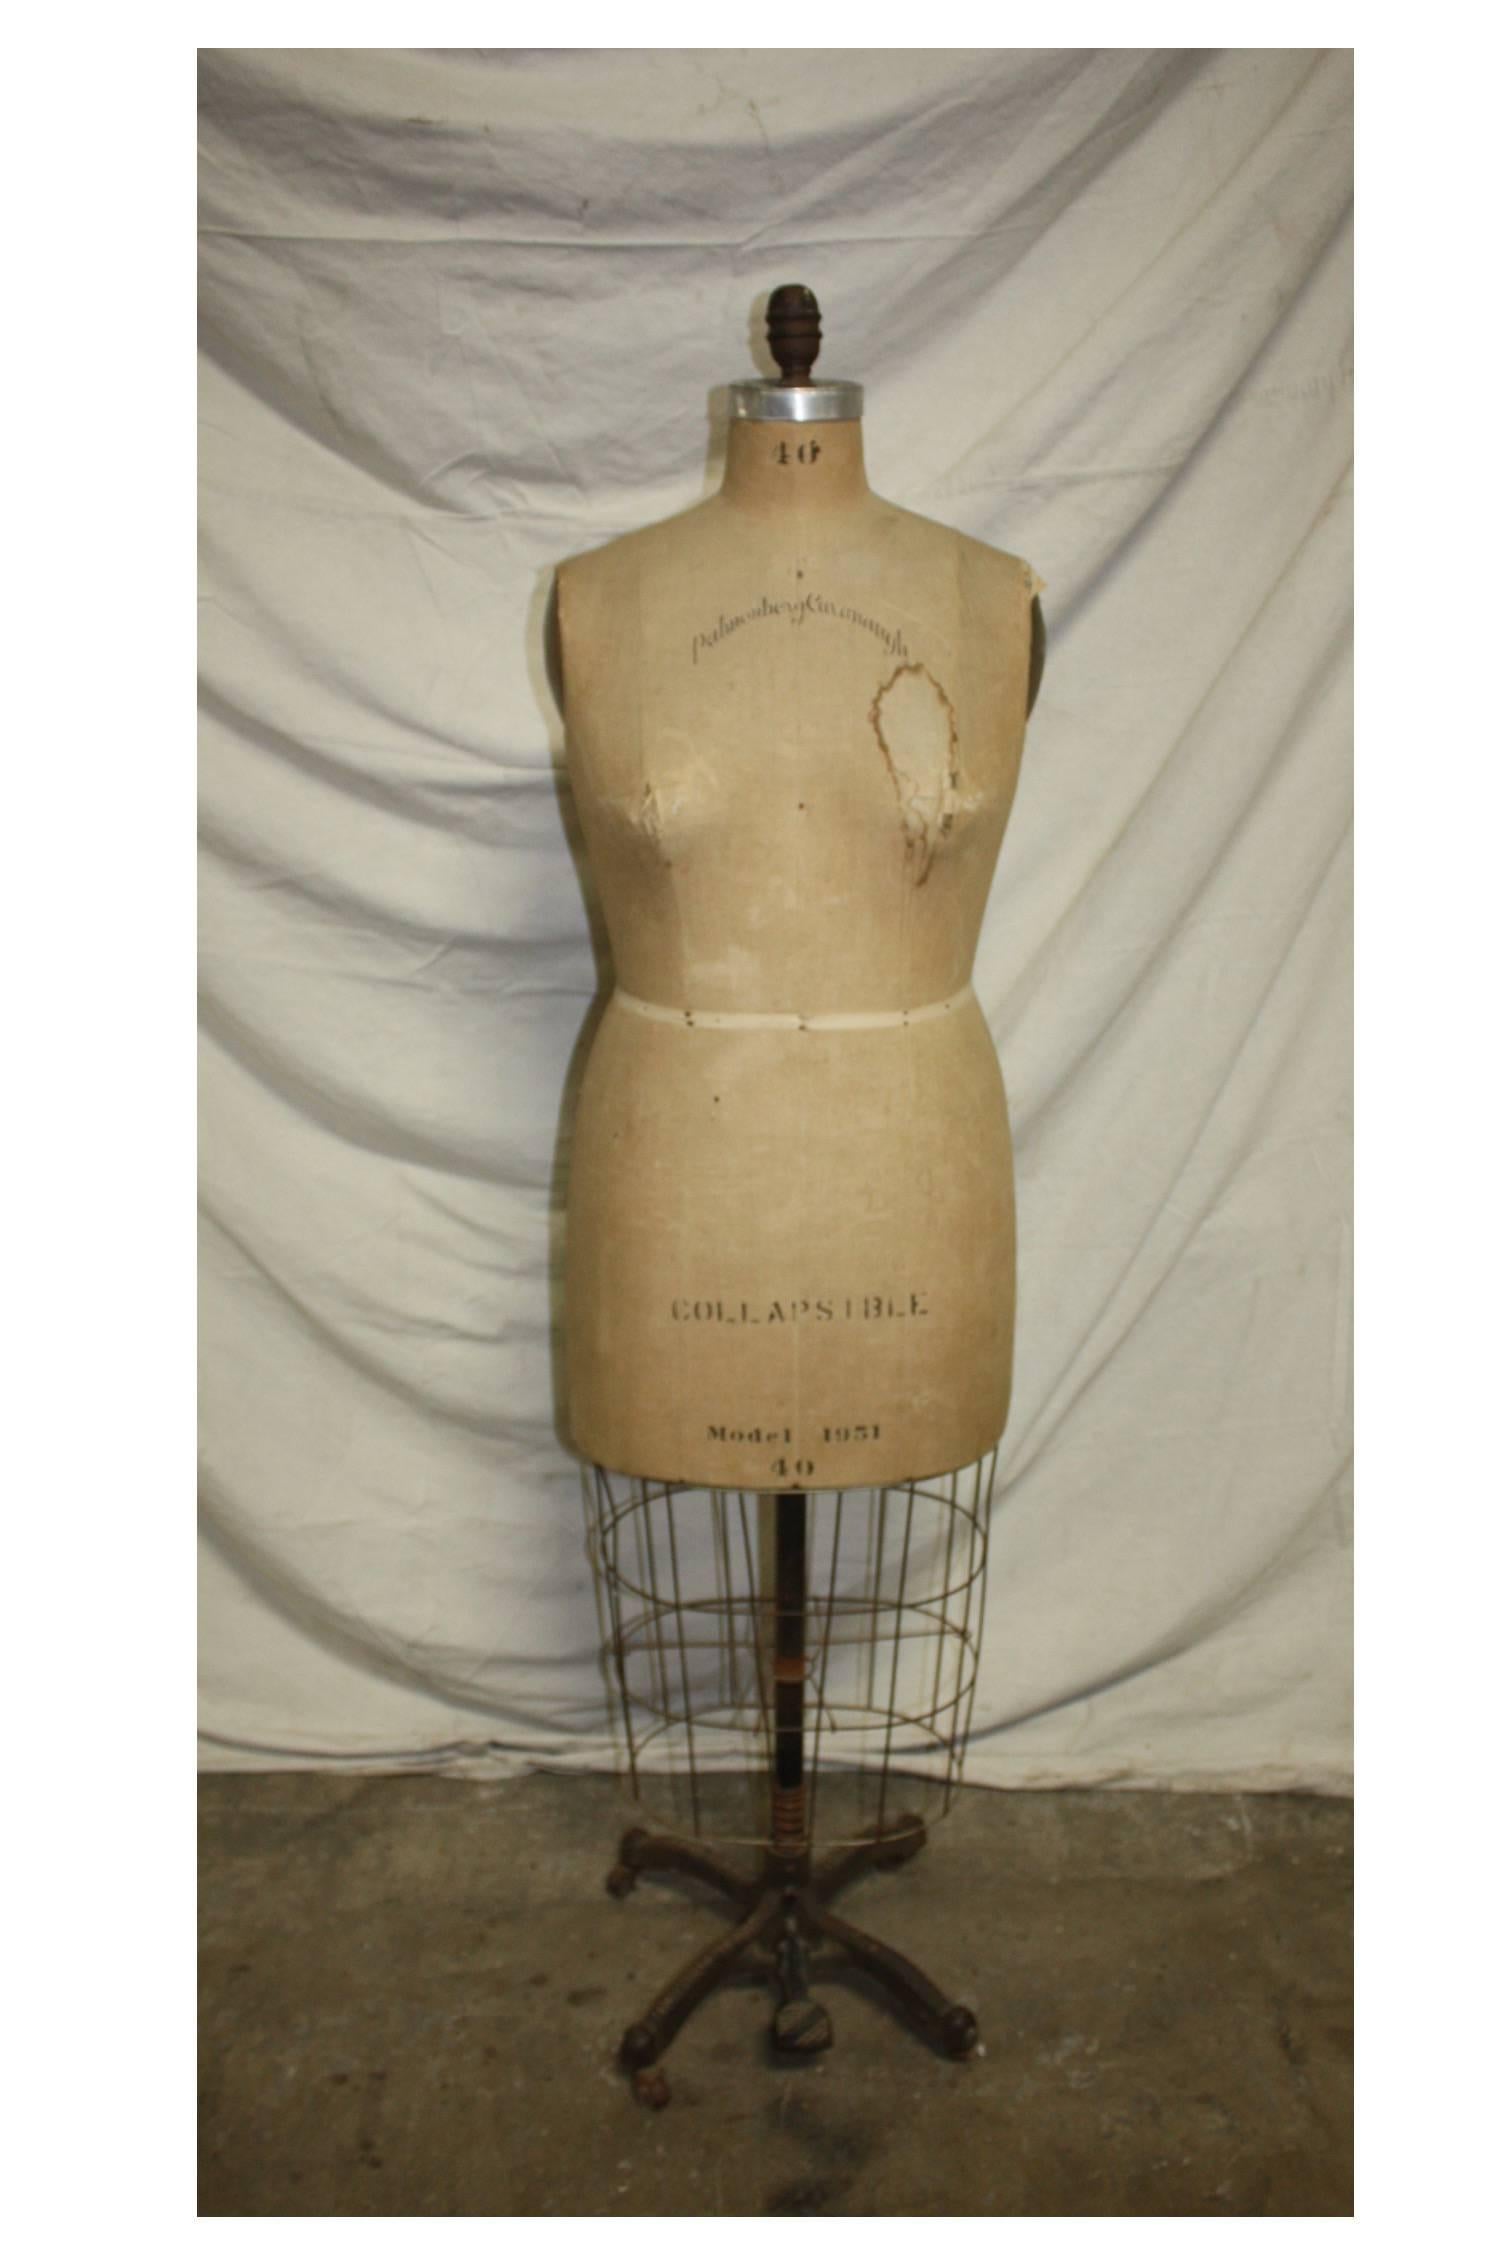 Dressmaker's dummy signed Cavanaugh New York and dated 1951.